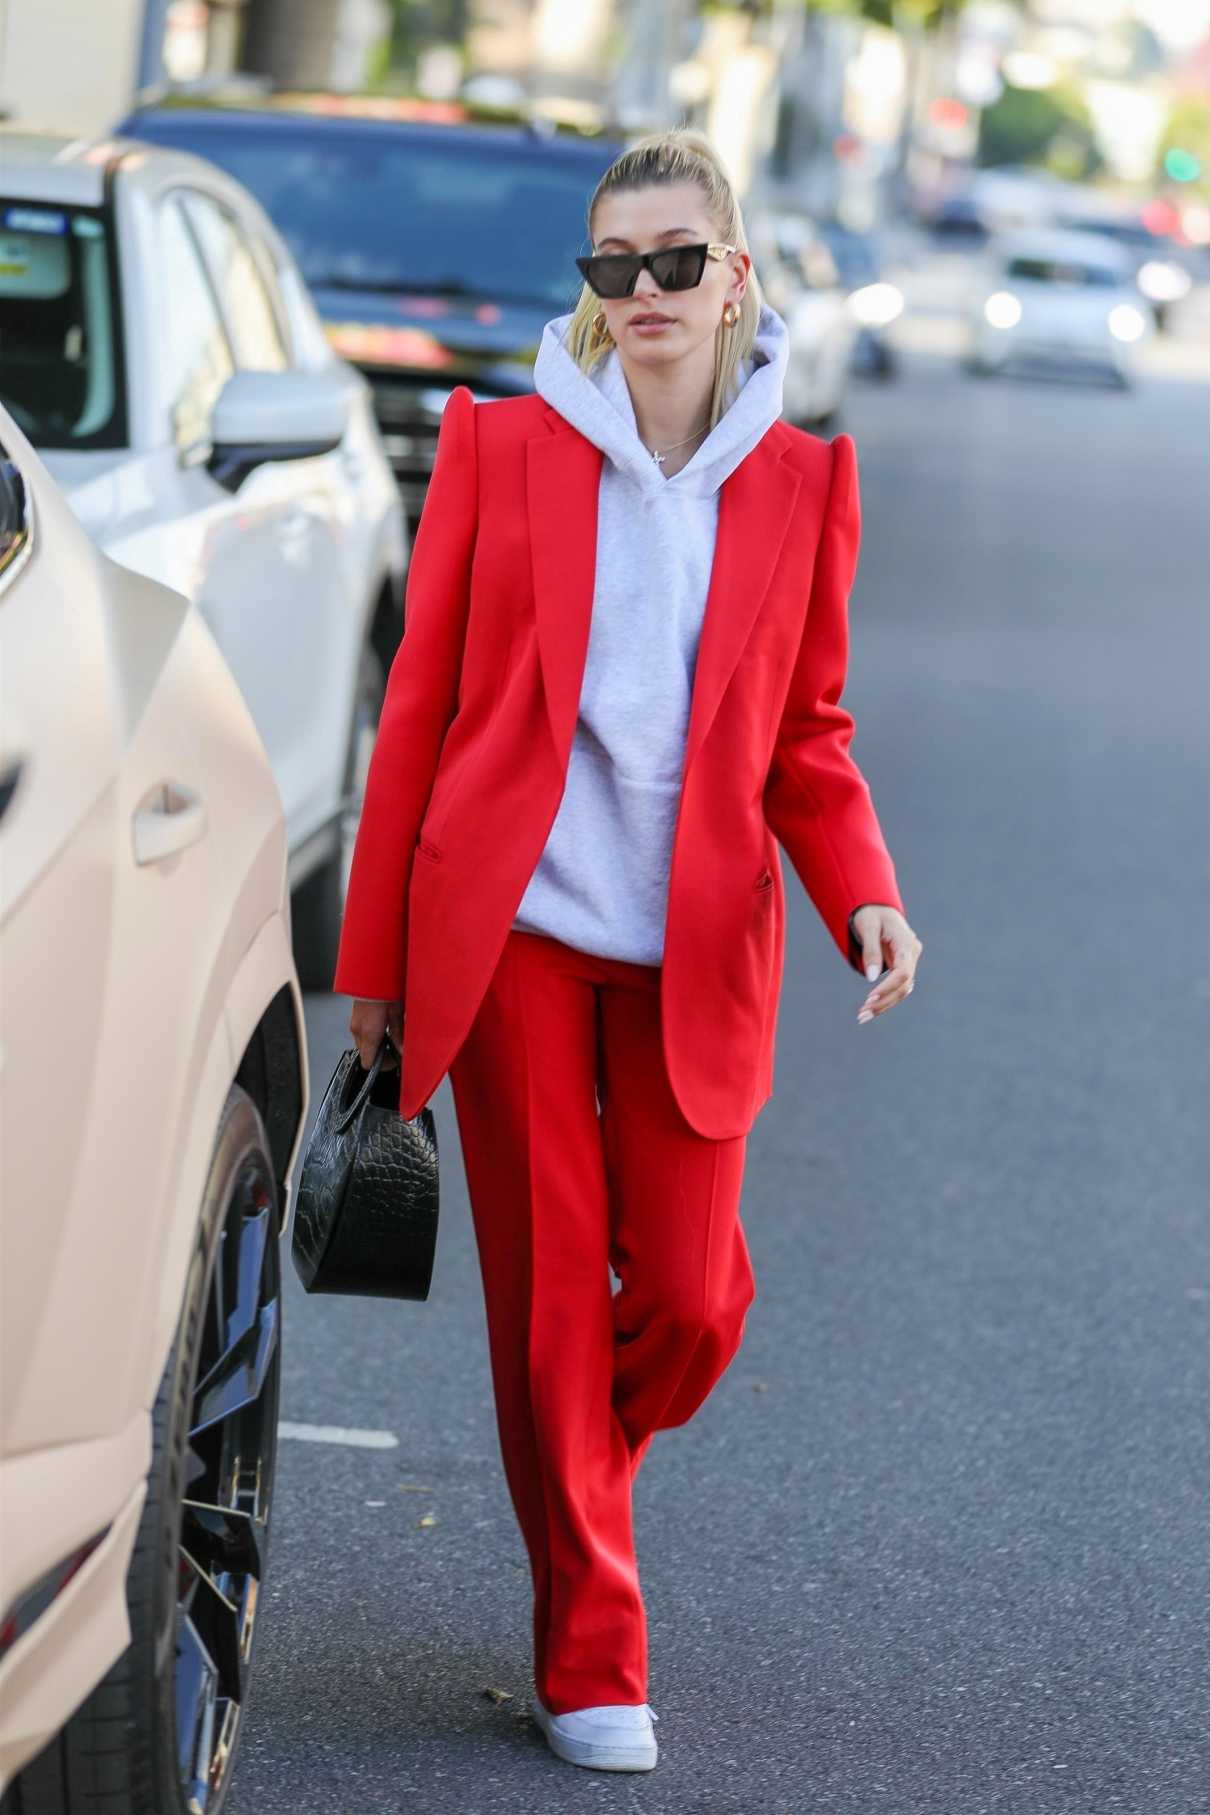 Hailey Baldwin In A Red Suit Was Seen Out In Beverly Hills 12 02 2019 2